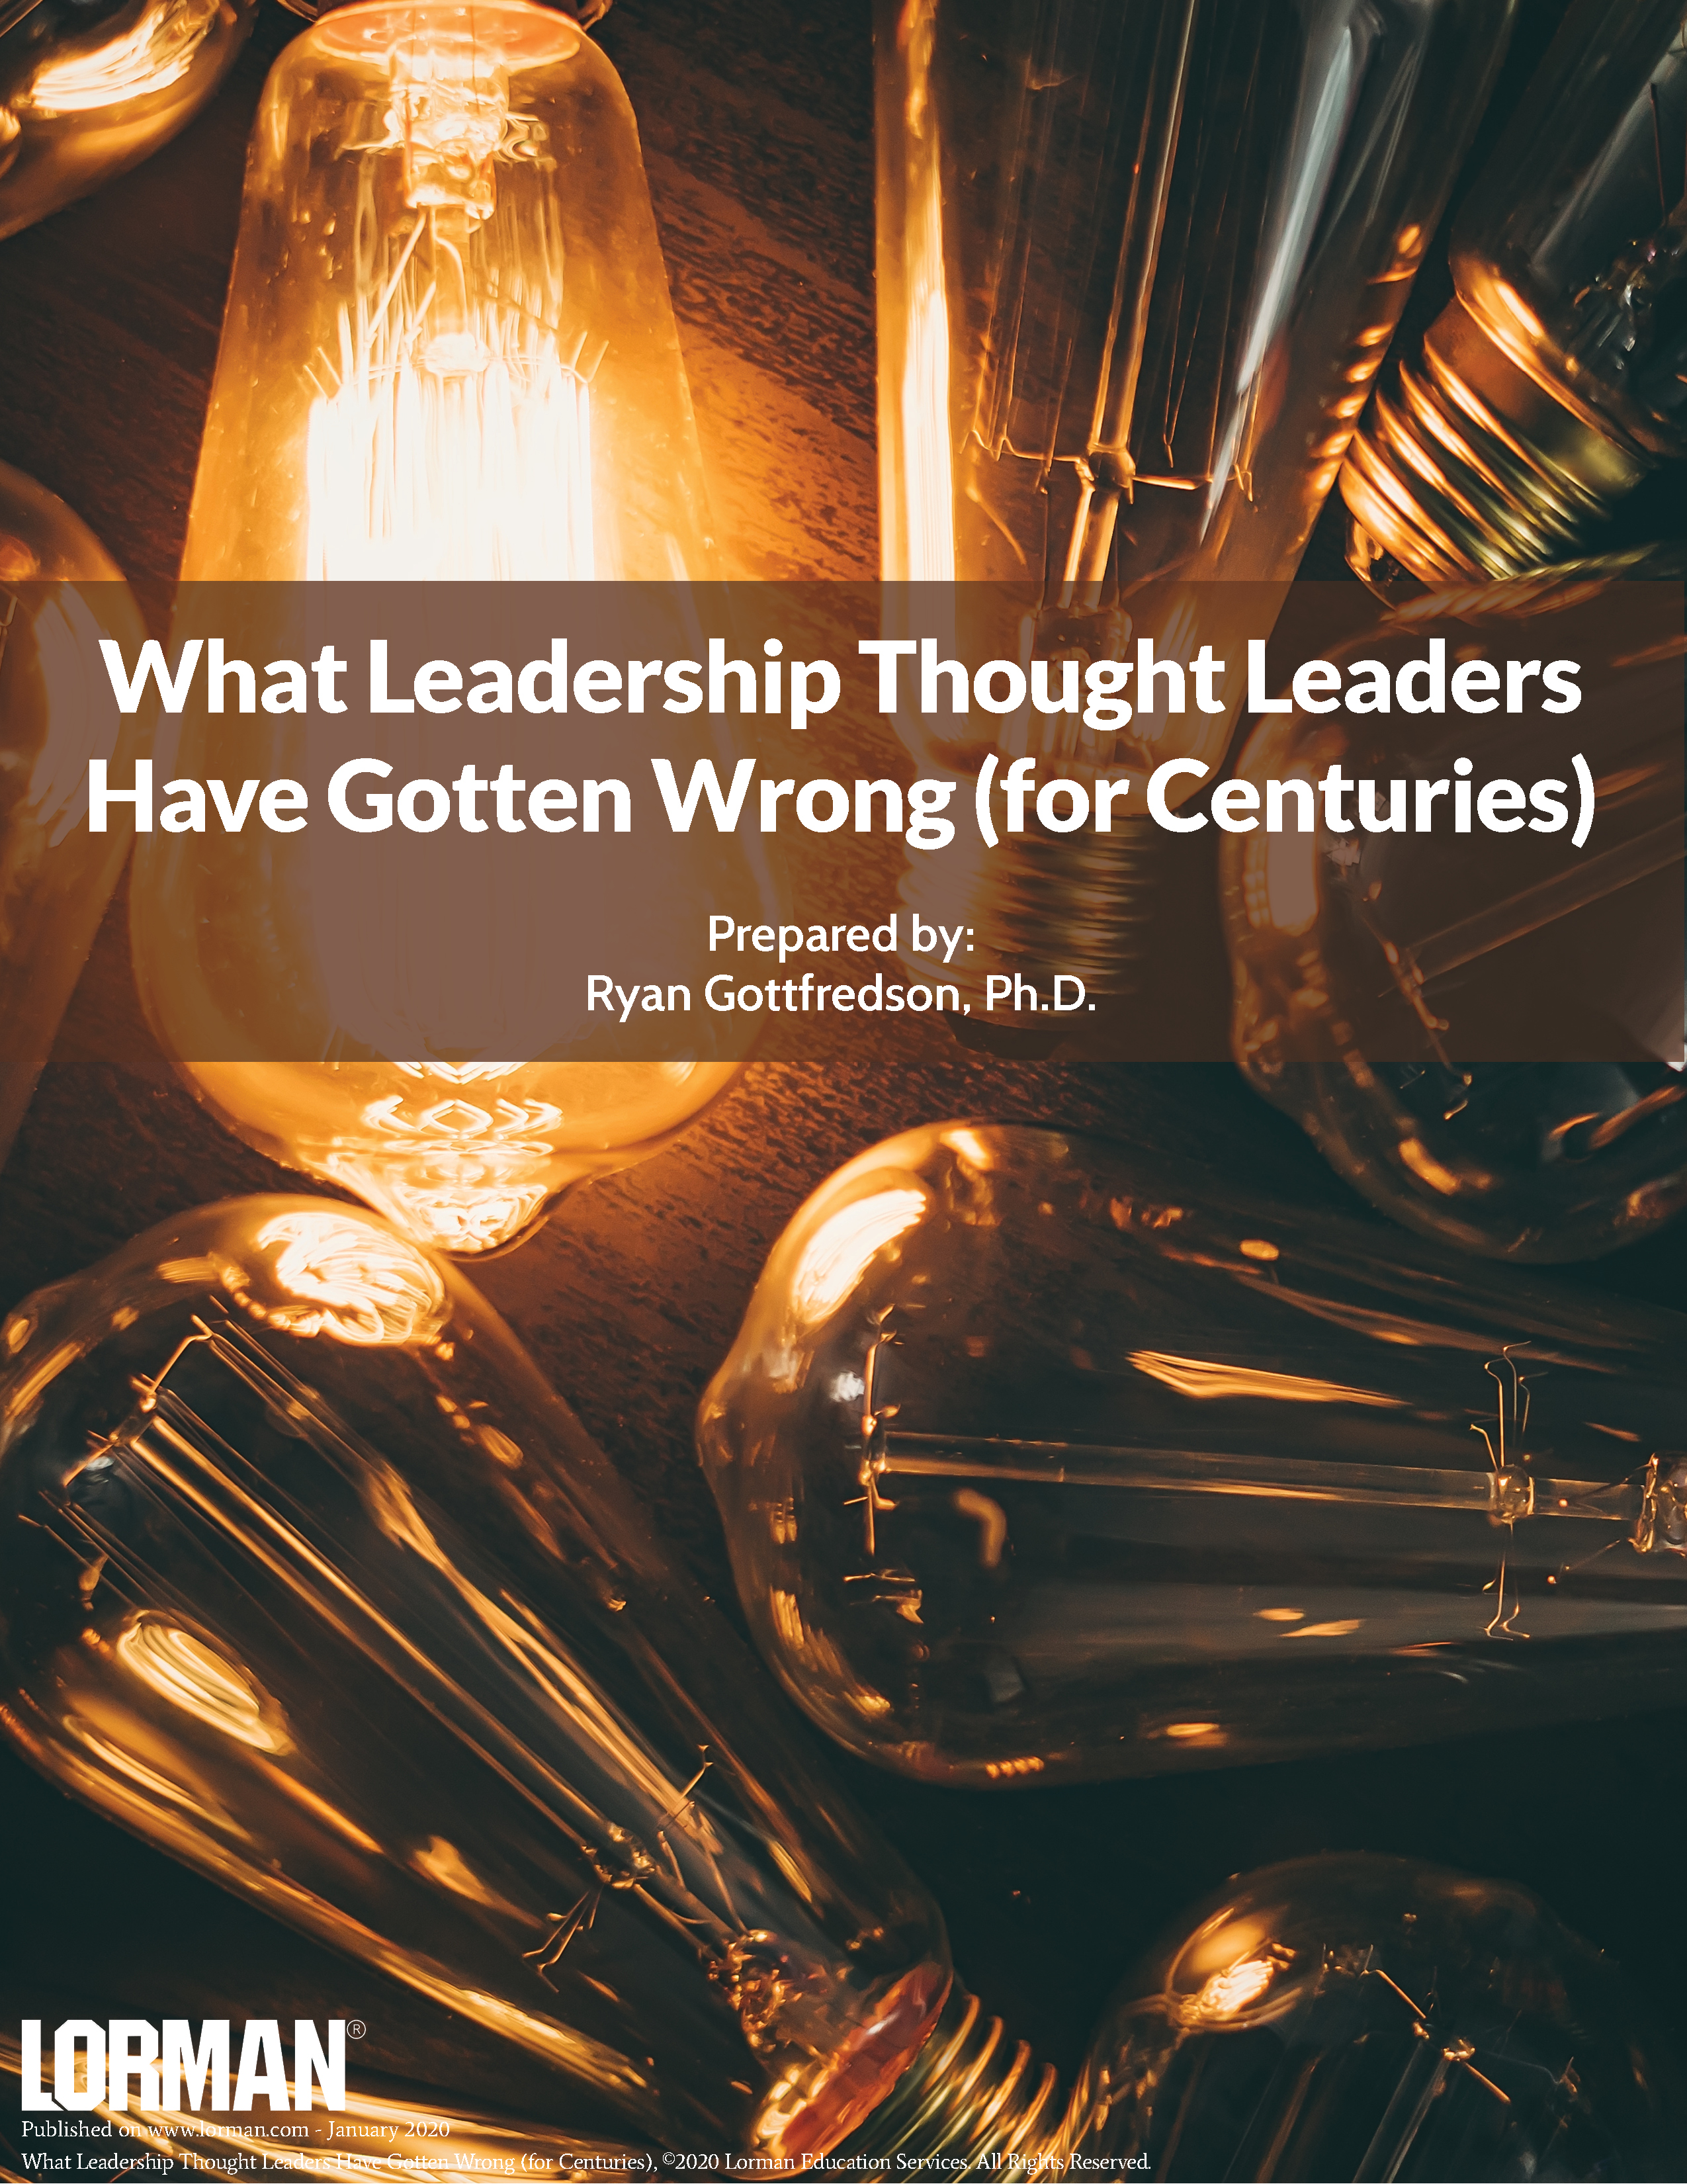 What Leadership Thought Leaders Have Gotten Wrong (for Centuries)